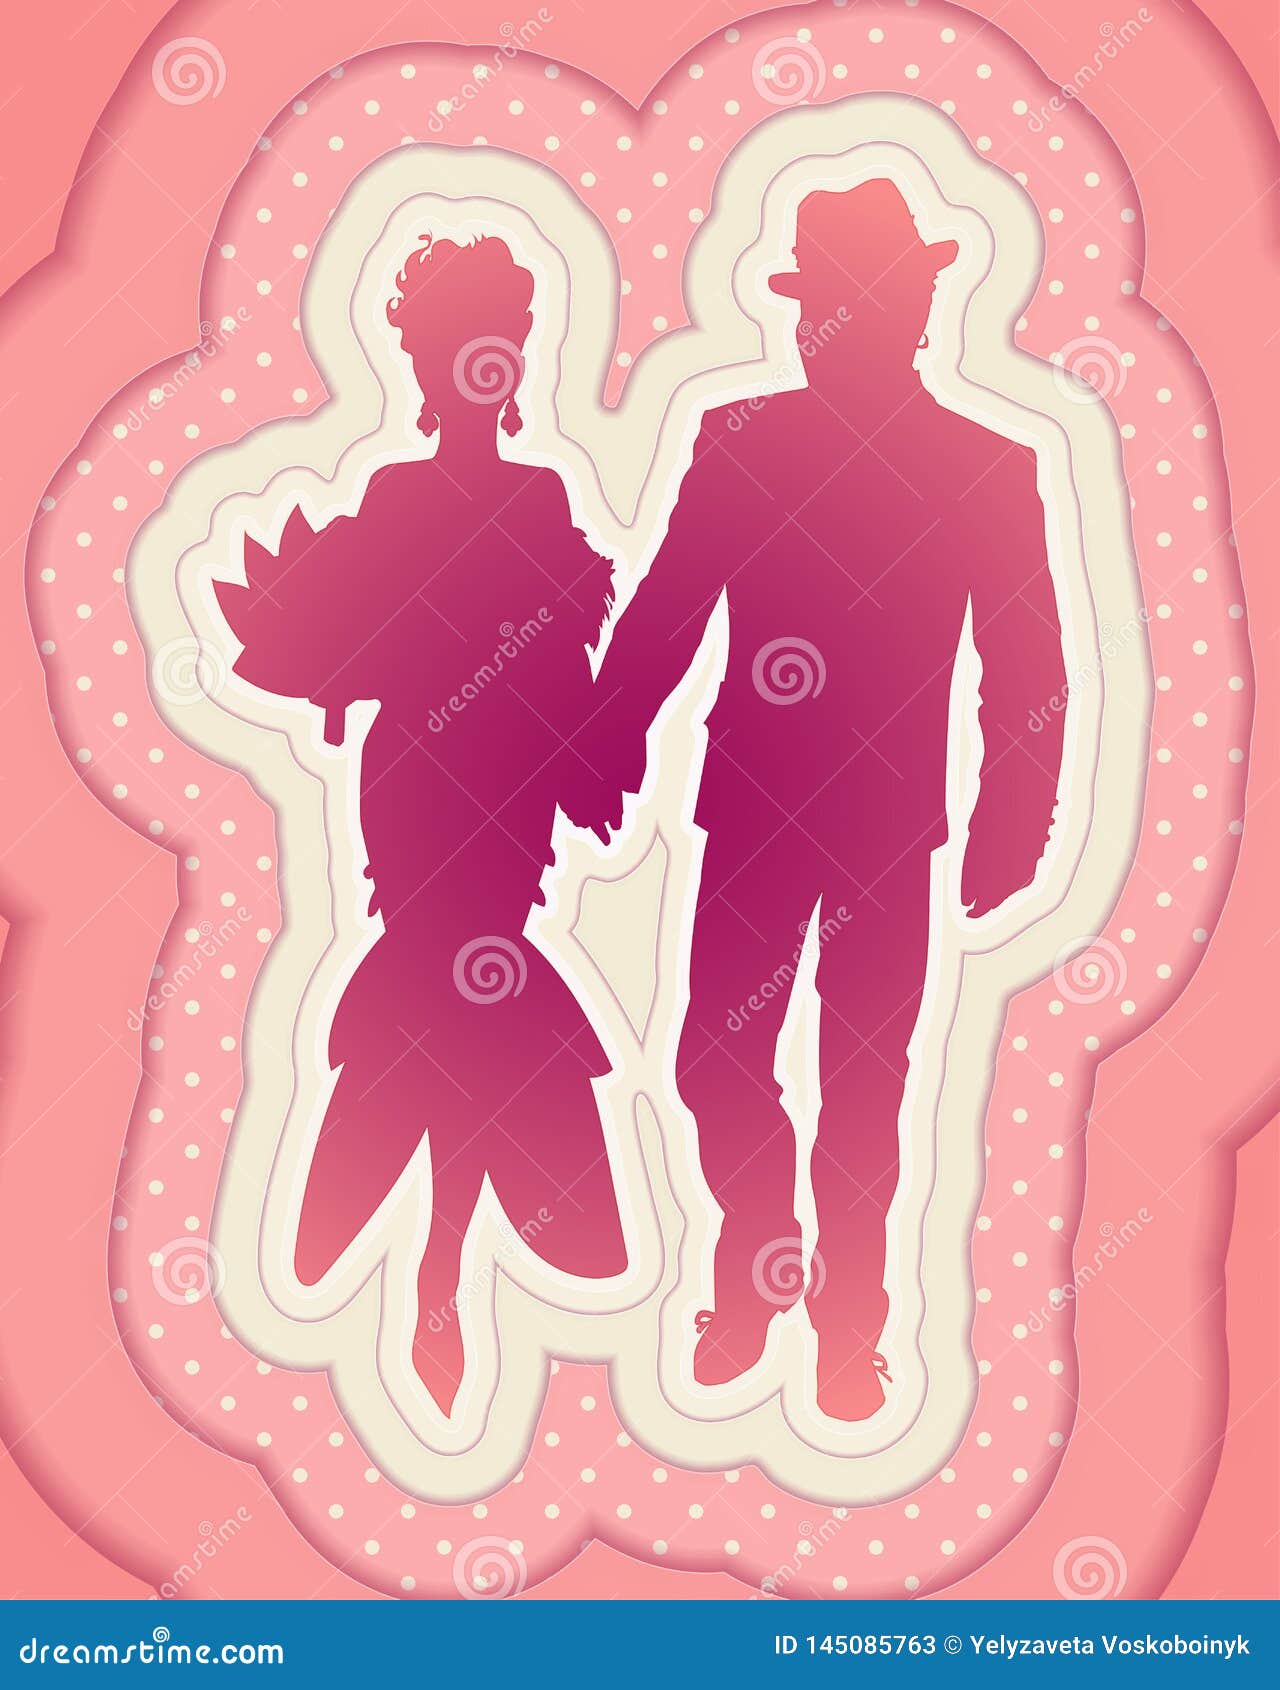 Beautiful silhouette of elegant couple. Decorative illustration in the style of paper cut. Depicts the silhouette of an elegant couple in evening wear. Woman and man go holding hands. She has a bouquet. Templates for design, cards